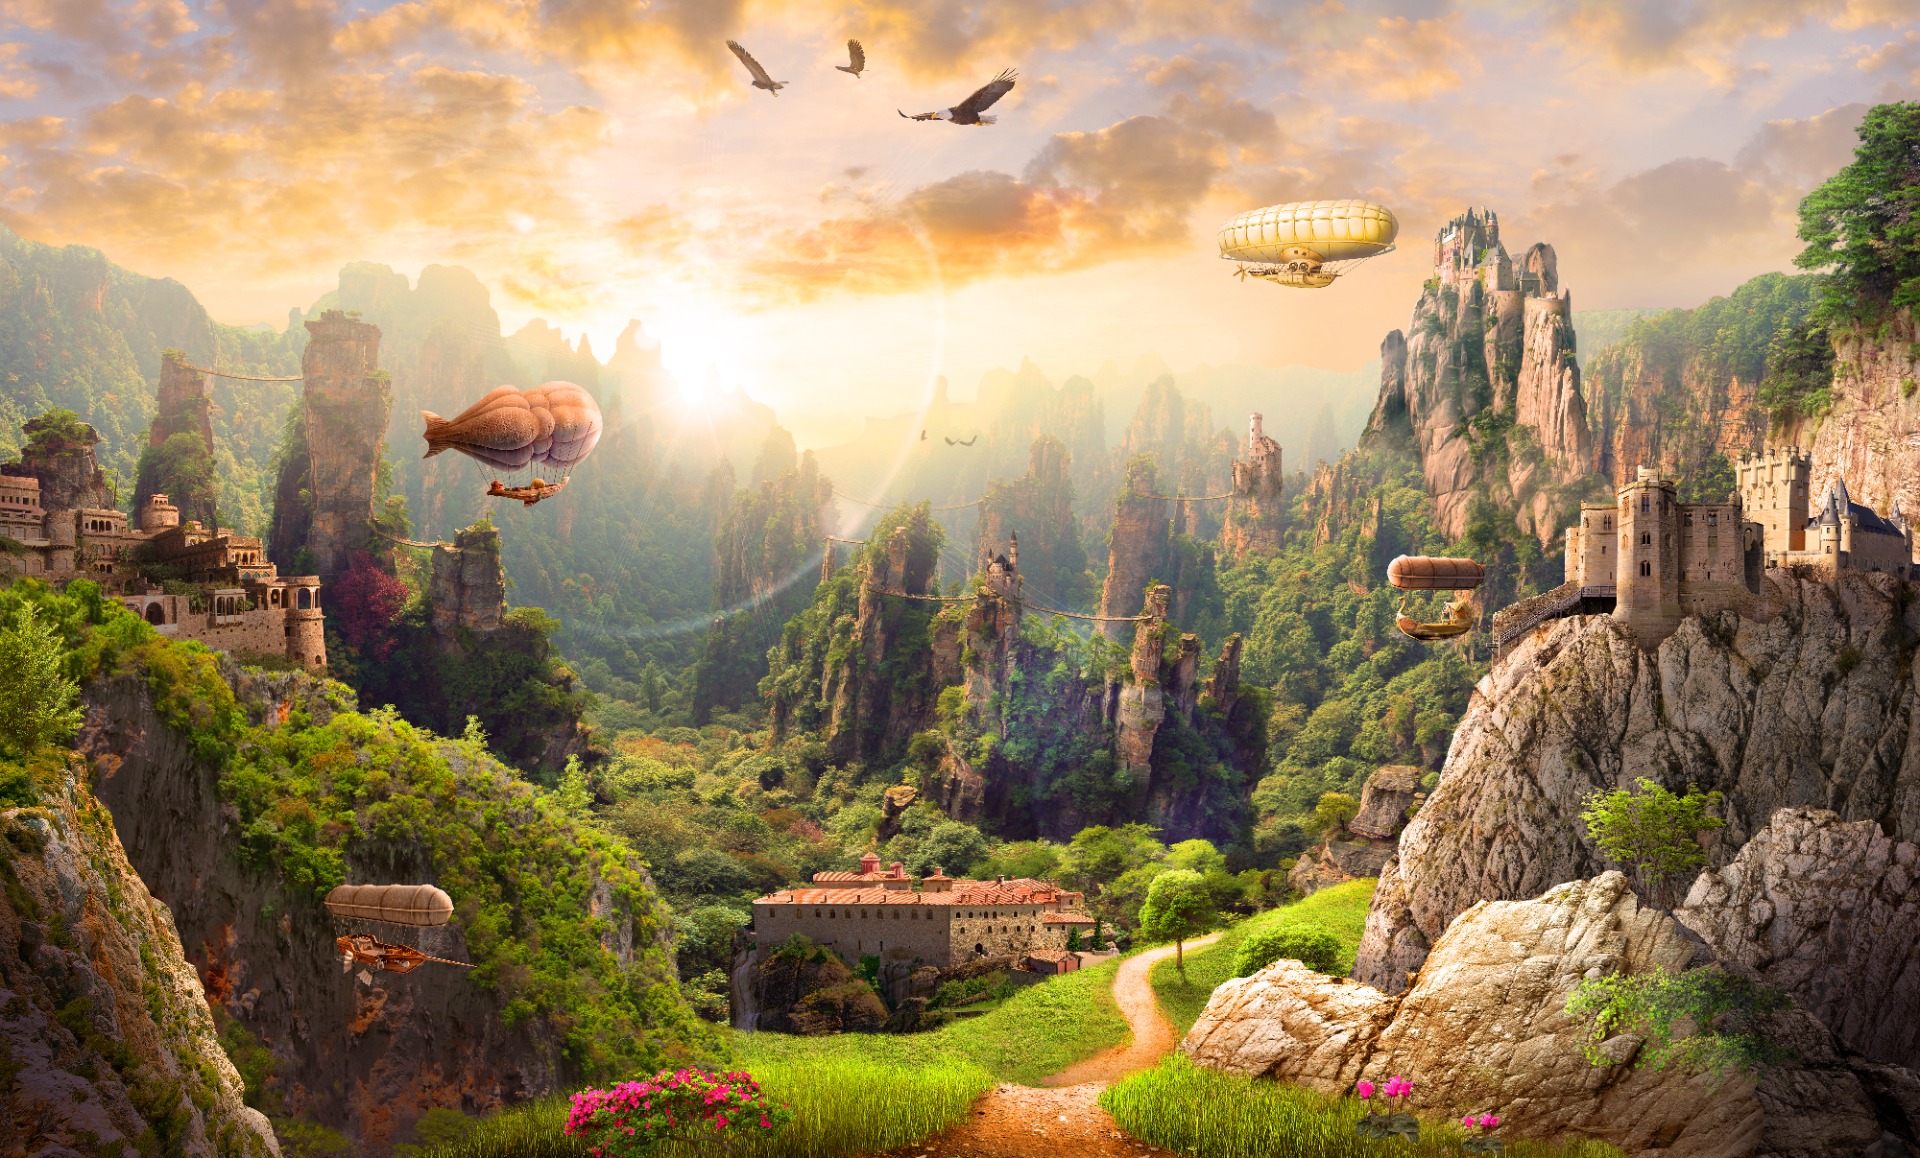 Hot Air Balloons Over Green Meadow Wall Mural - Murals Your Way